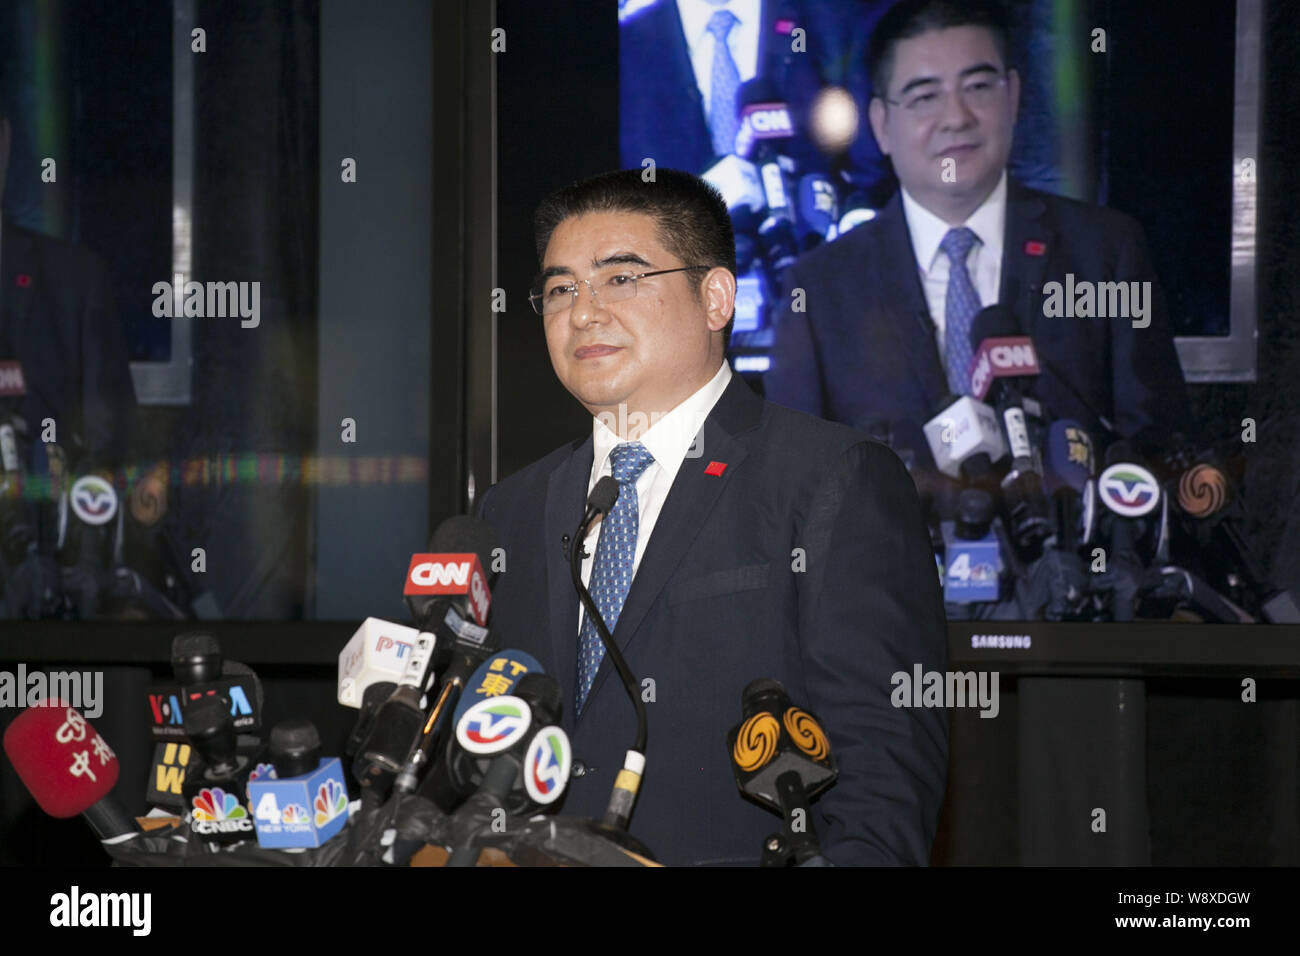 --FILE--Chinese billionaire philanthropist Chen Guangbiao, Chairman of Jiangsu Huangpu Recycling Resources Co., Ltd., is interviewed during a charity Stock Photo